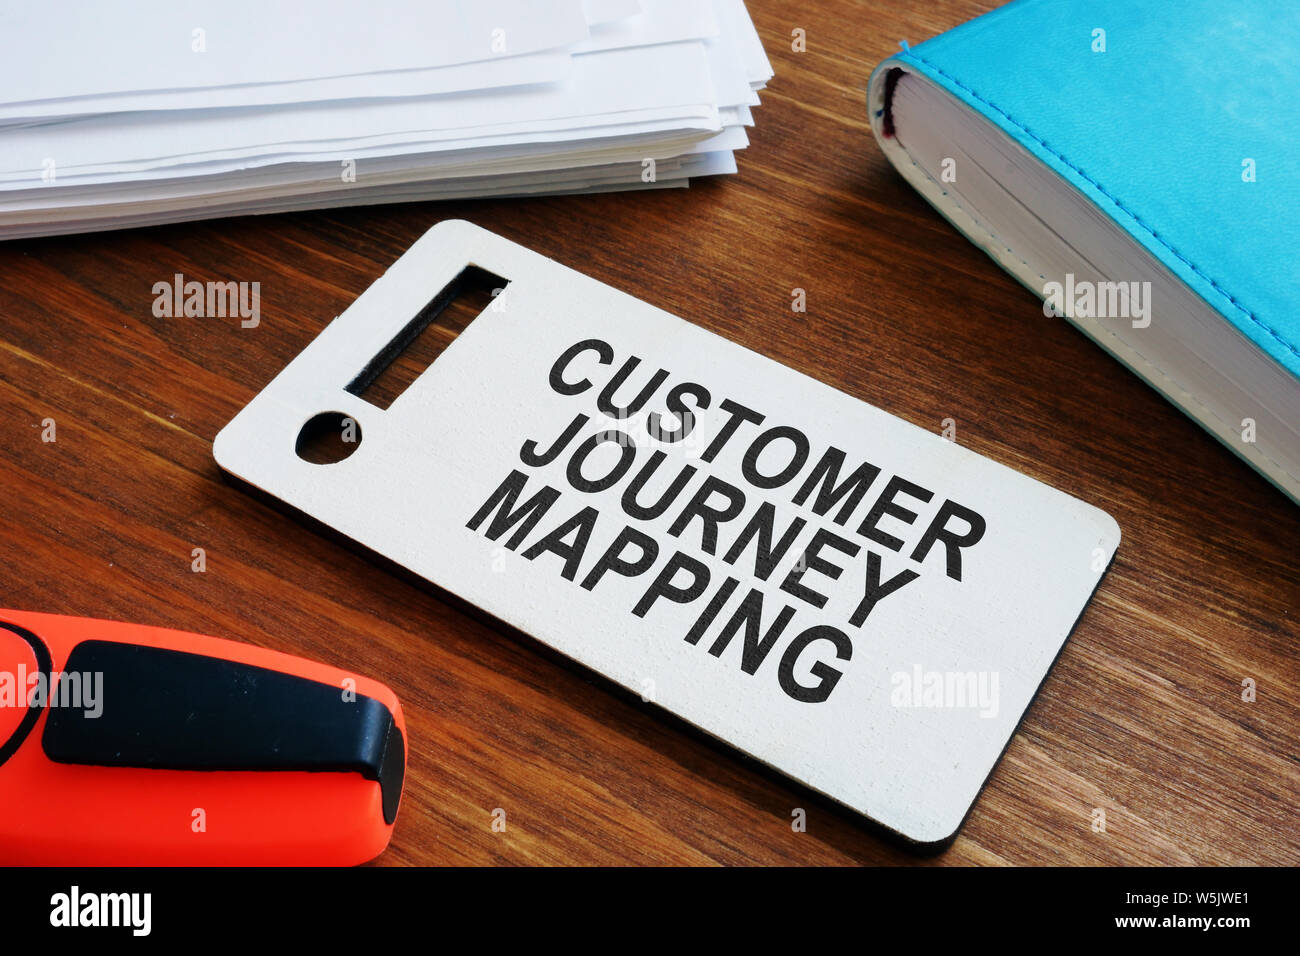 Plate with sign Customer journey mapping and papers with map. Stock Photo